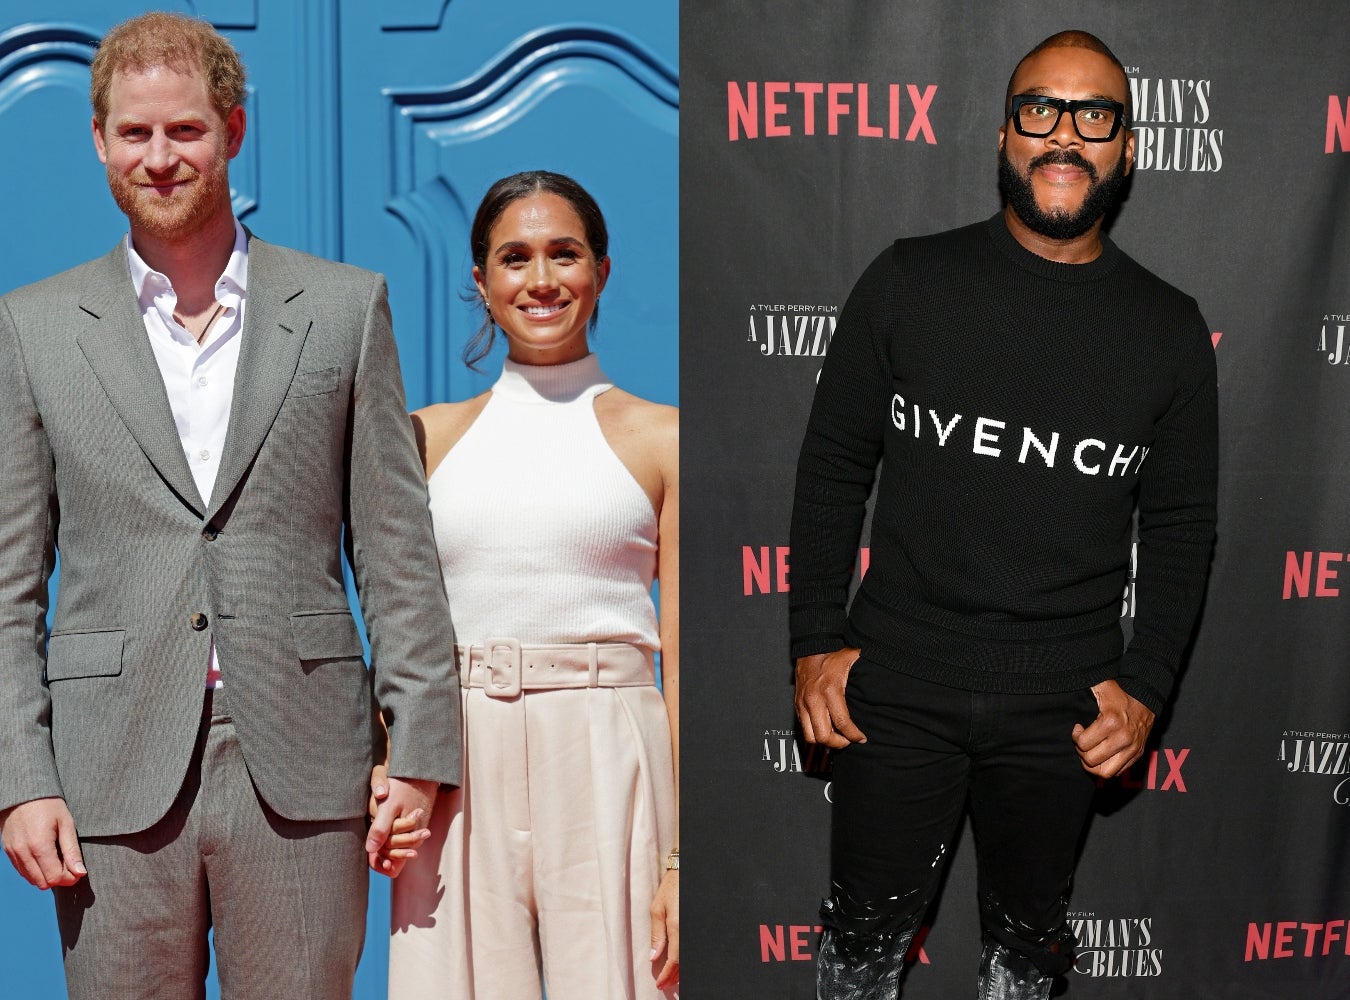 Tyler Perry 'Wanted To Do Anything I Could' To Support Meghan Markle And Prince Harry When He Let Them Stay In His Home